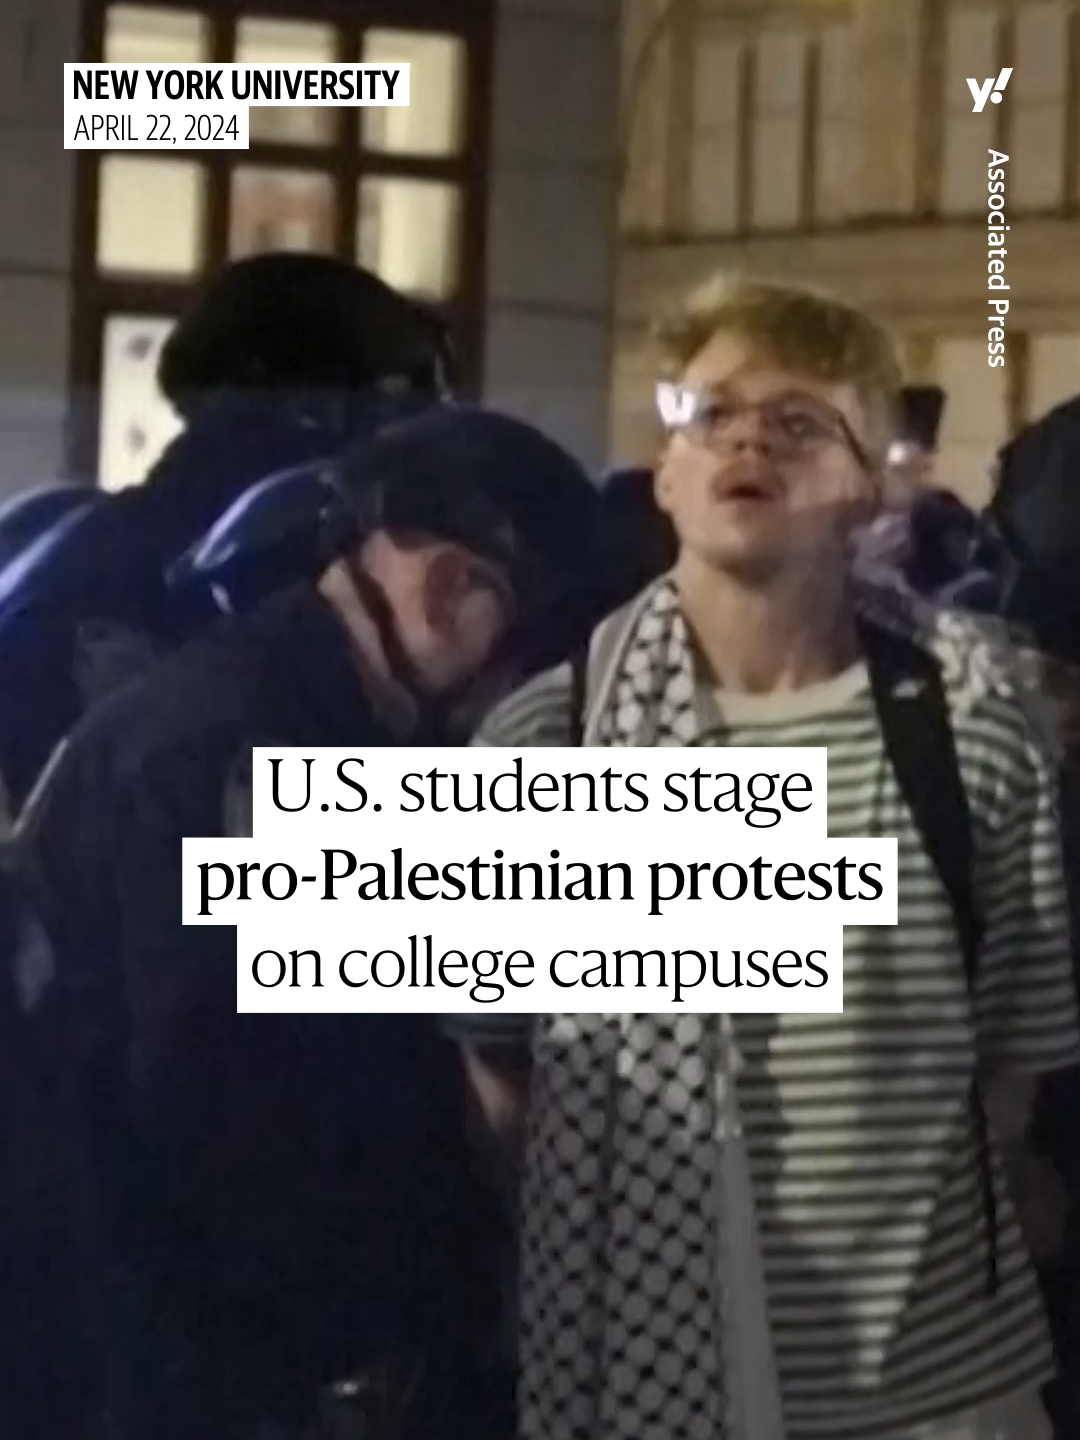 Tensions over the Israel-Hamas war continue to escalate, with police arresting hundreds of pro-Palestinian demonstrators at college campuses across the U.S. #news #collegetok #yale #nyu #newyork #palestine🇵🇸 #israel🇮🇱 #yahoonews